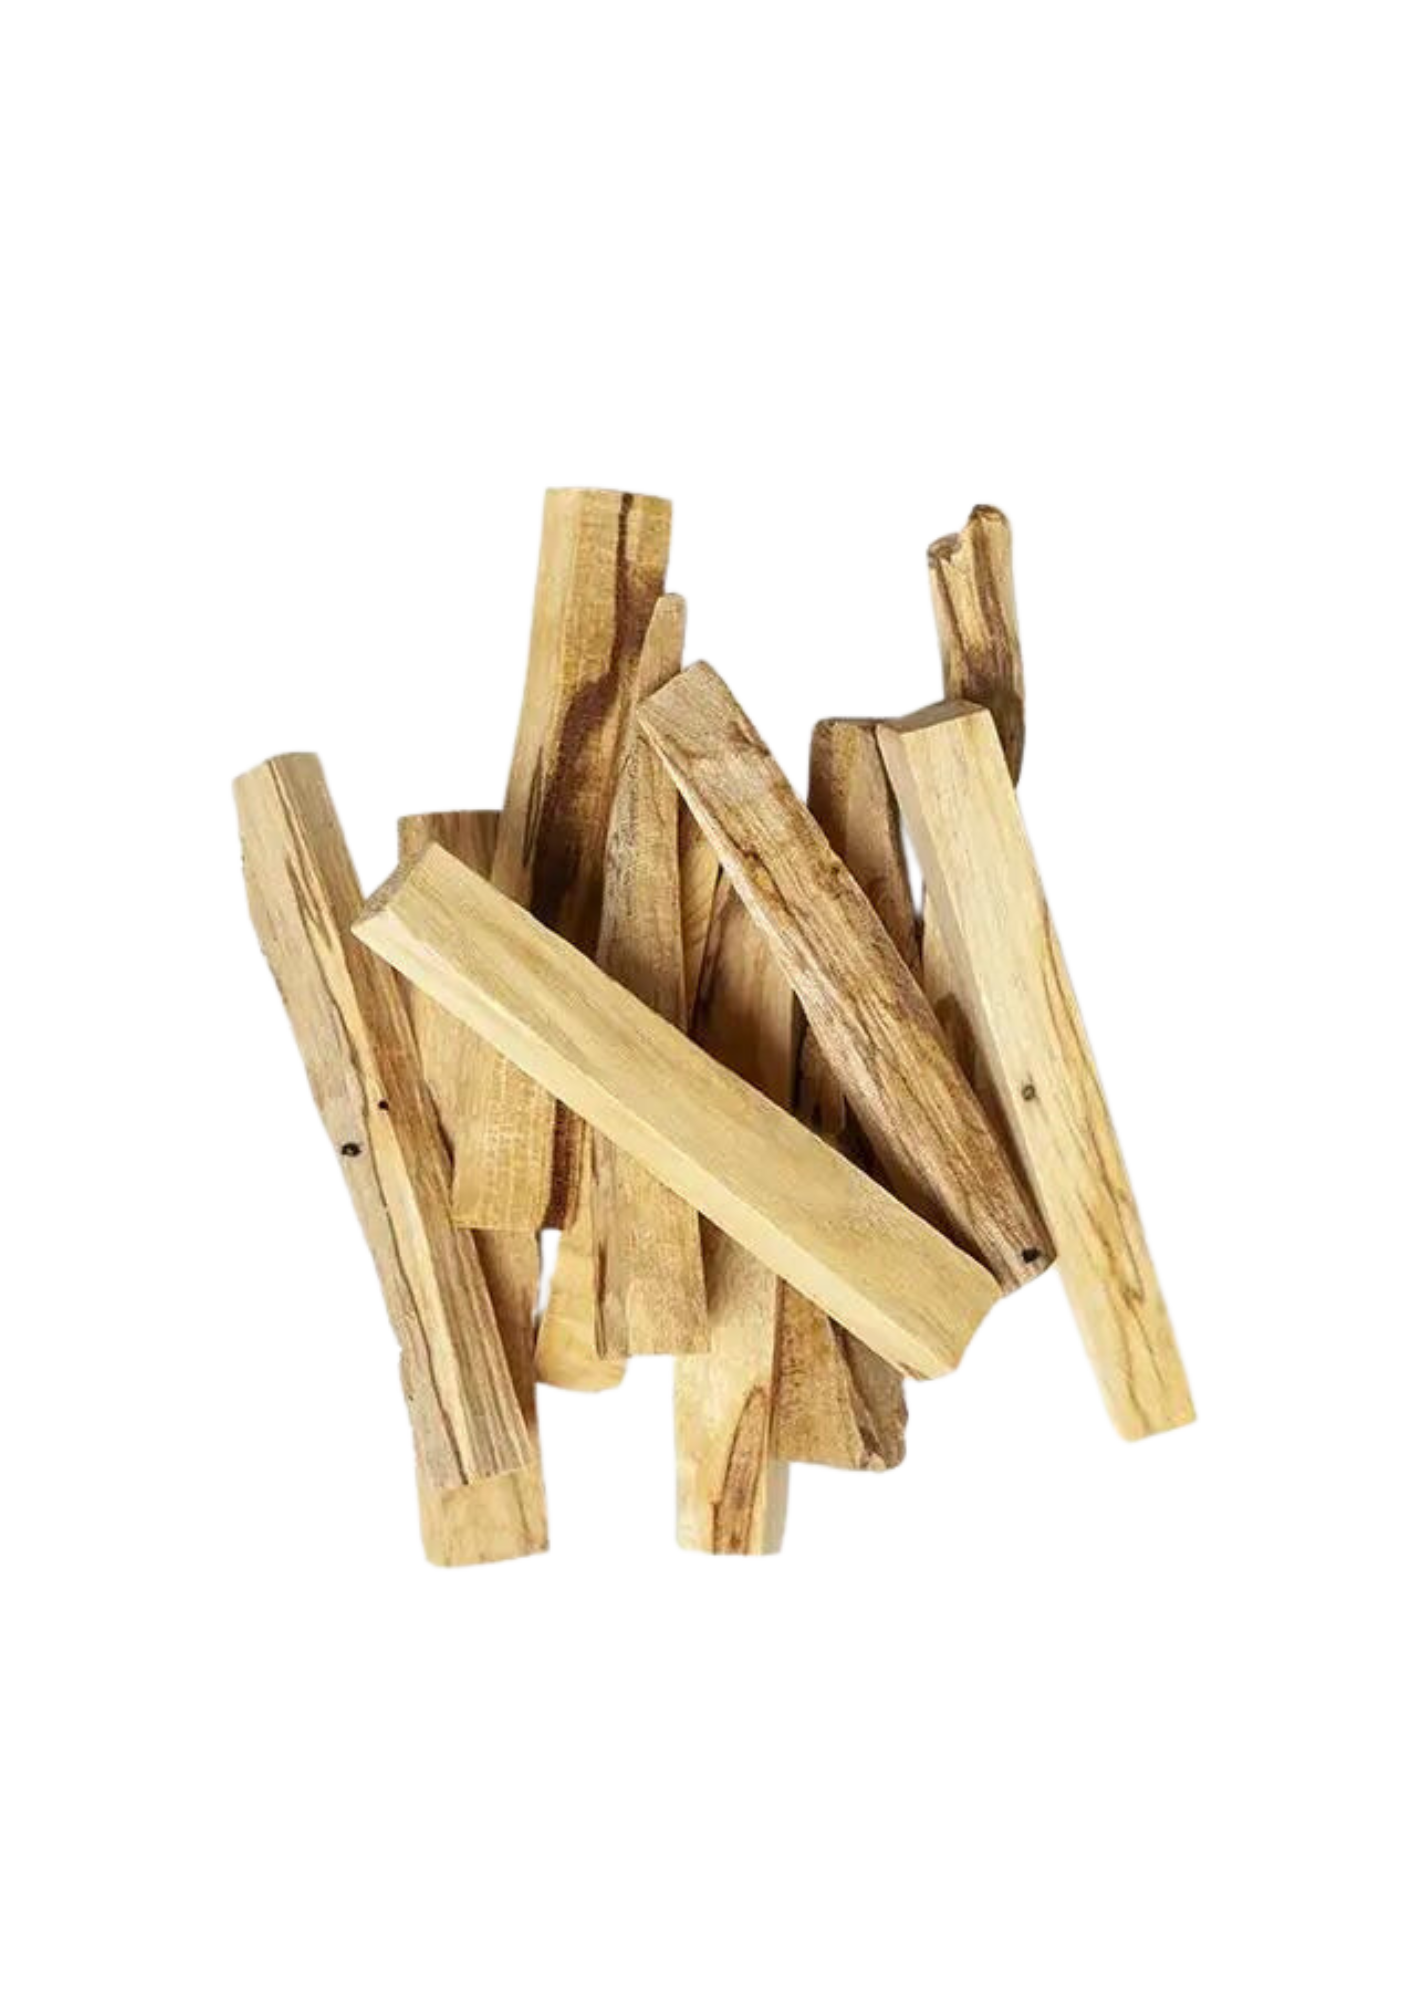 Holy Wood”: The History and Benefits of Palo Santo –